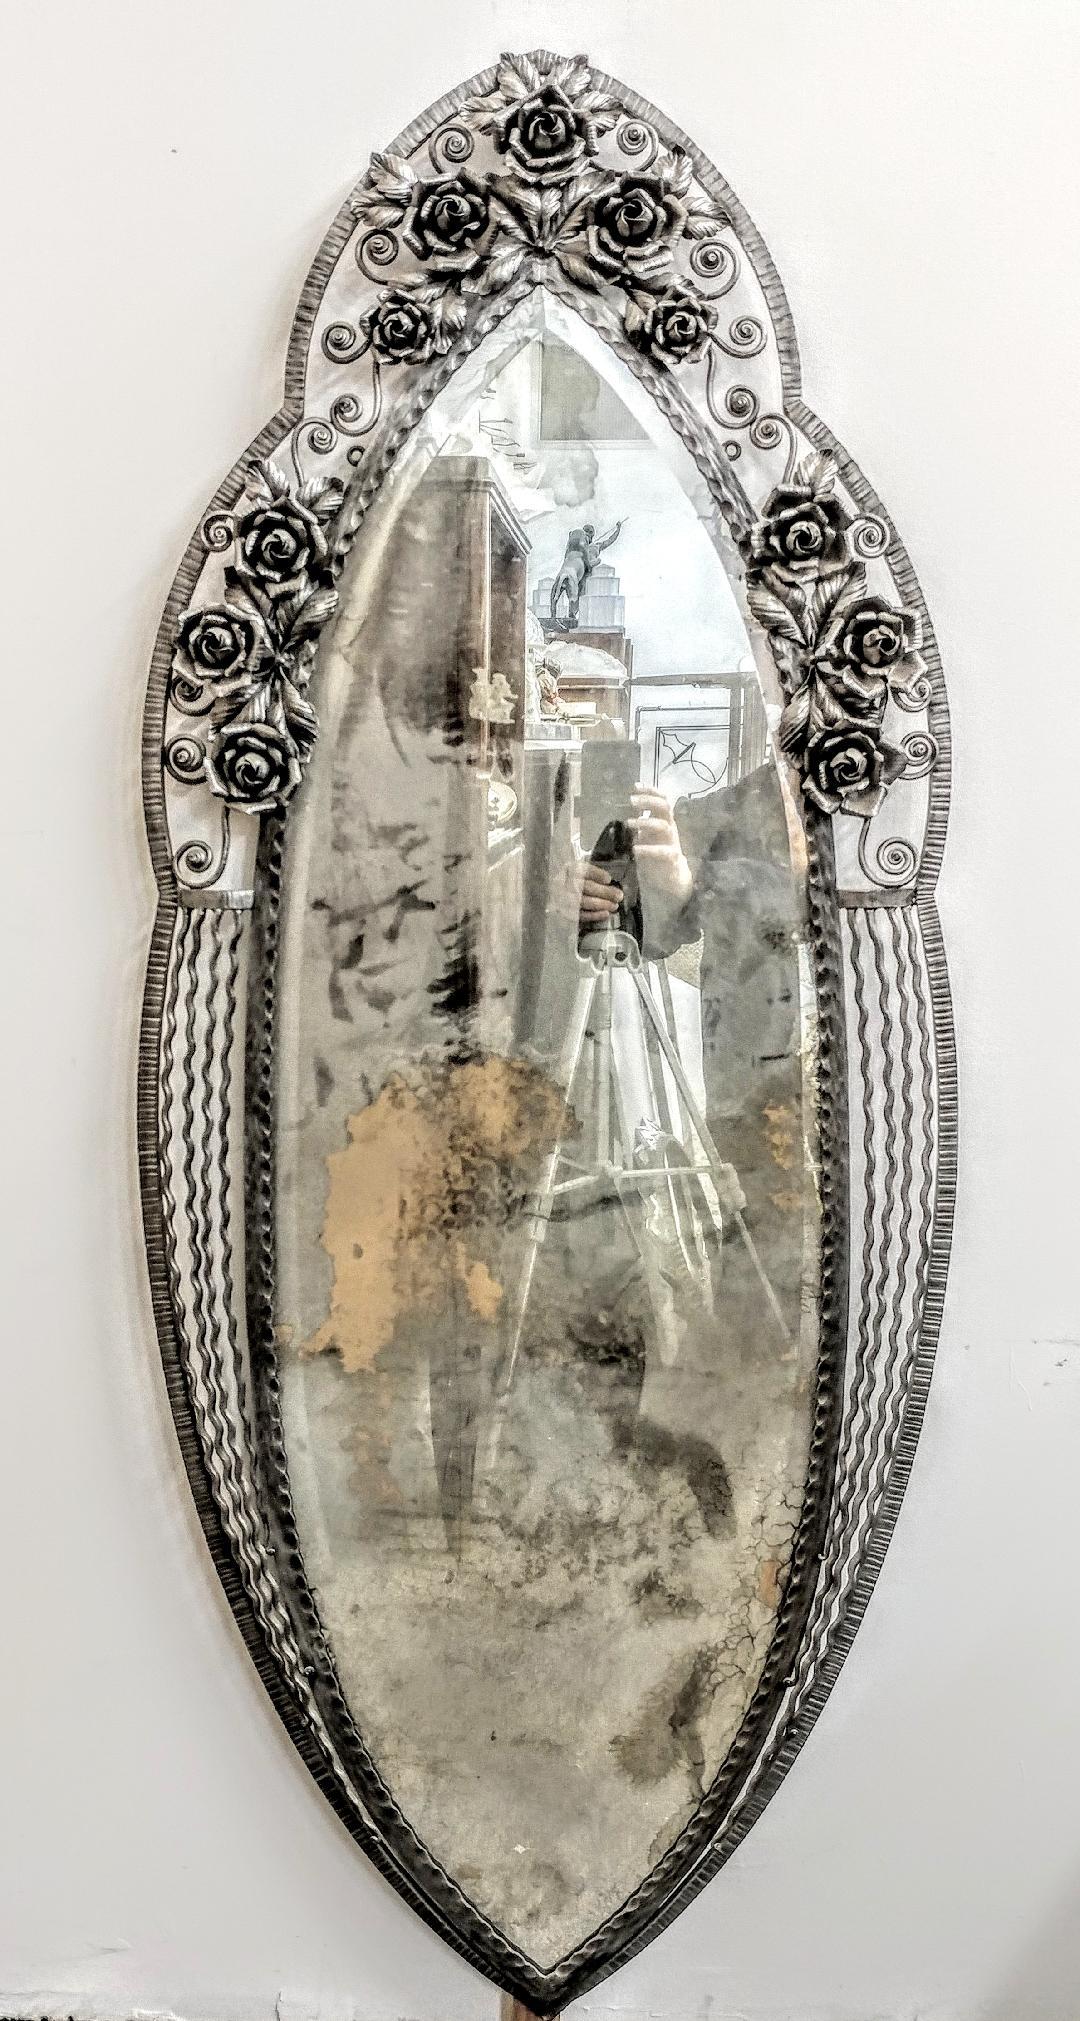 A majestic French Art Deco rare oval-shaped wrought iron mirror, surrounded by intricate flowers and leaves throughout. Scrolls with smooth and hammered texture. A new mirror will be included. Complimentary drop-off to the tri-state area. We are the